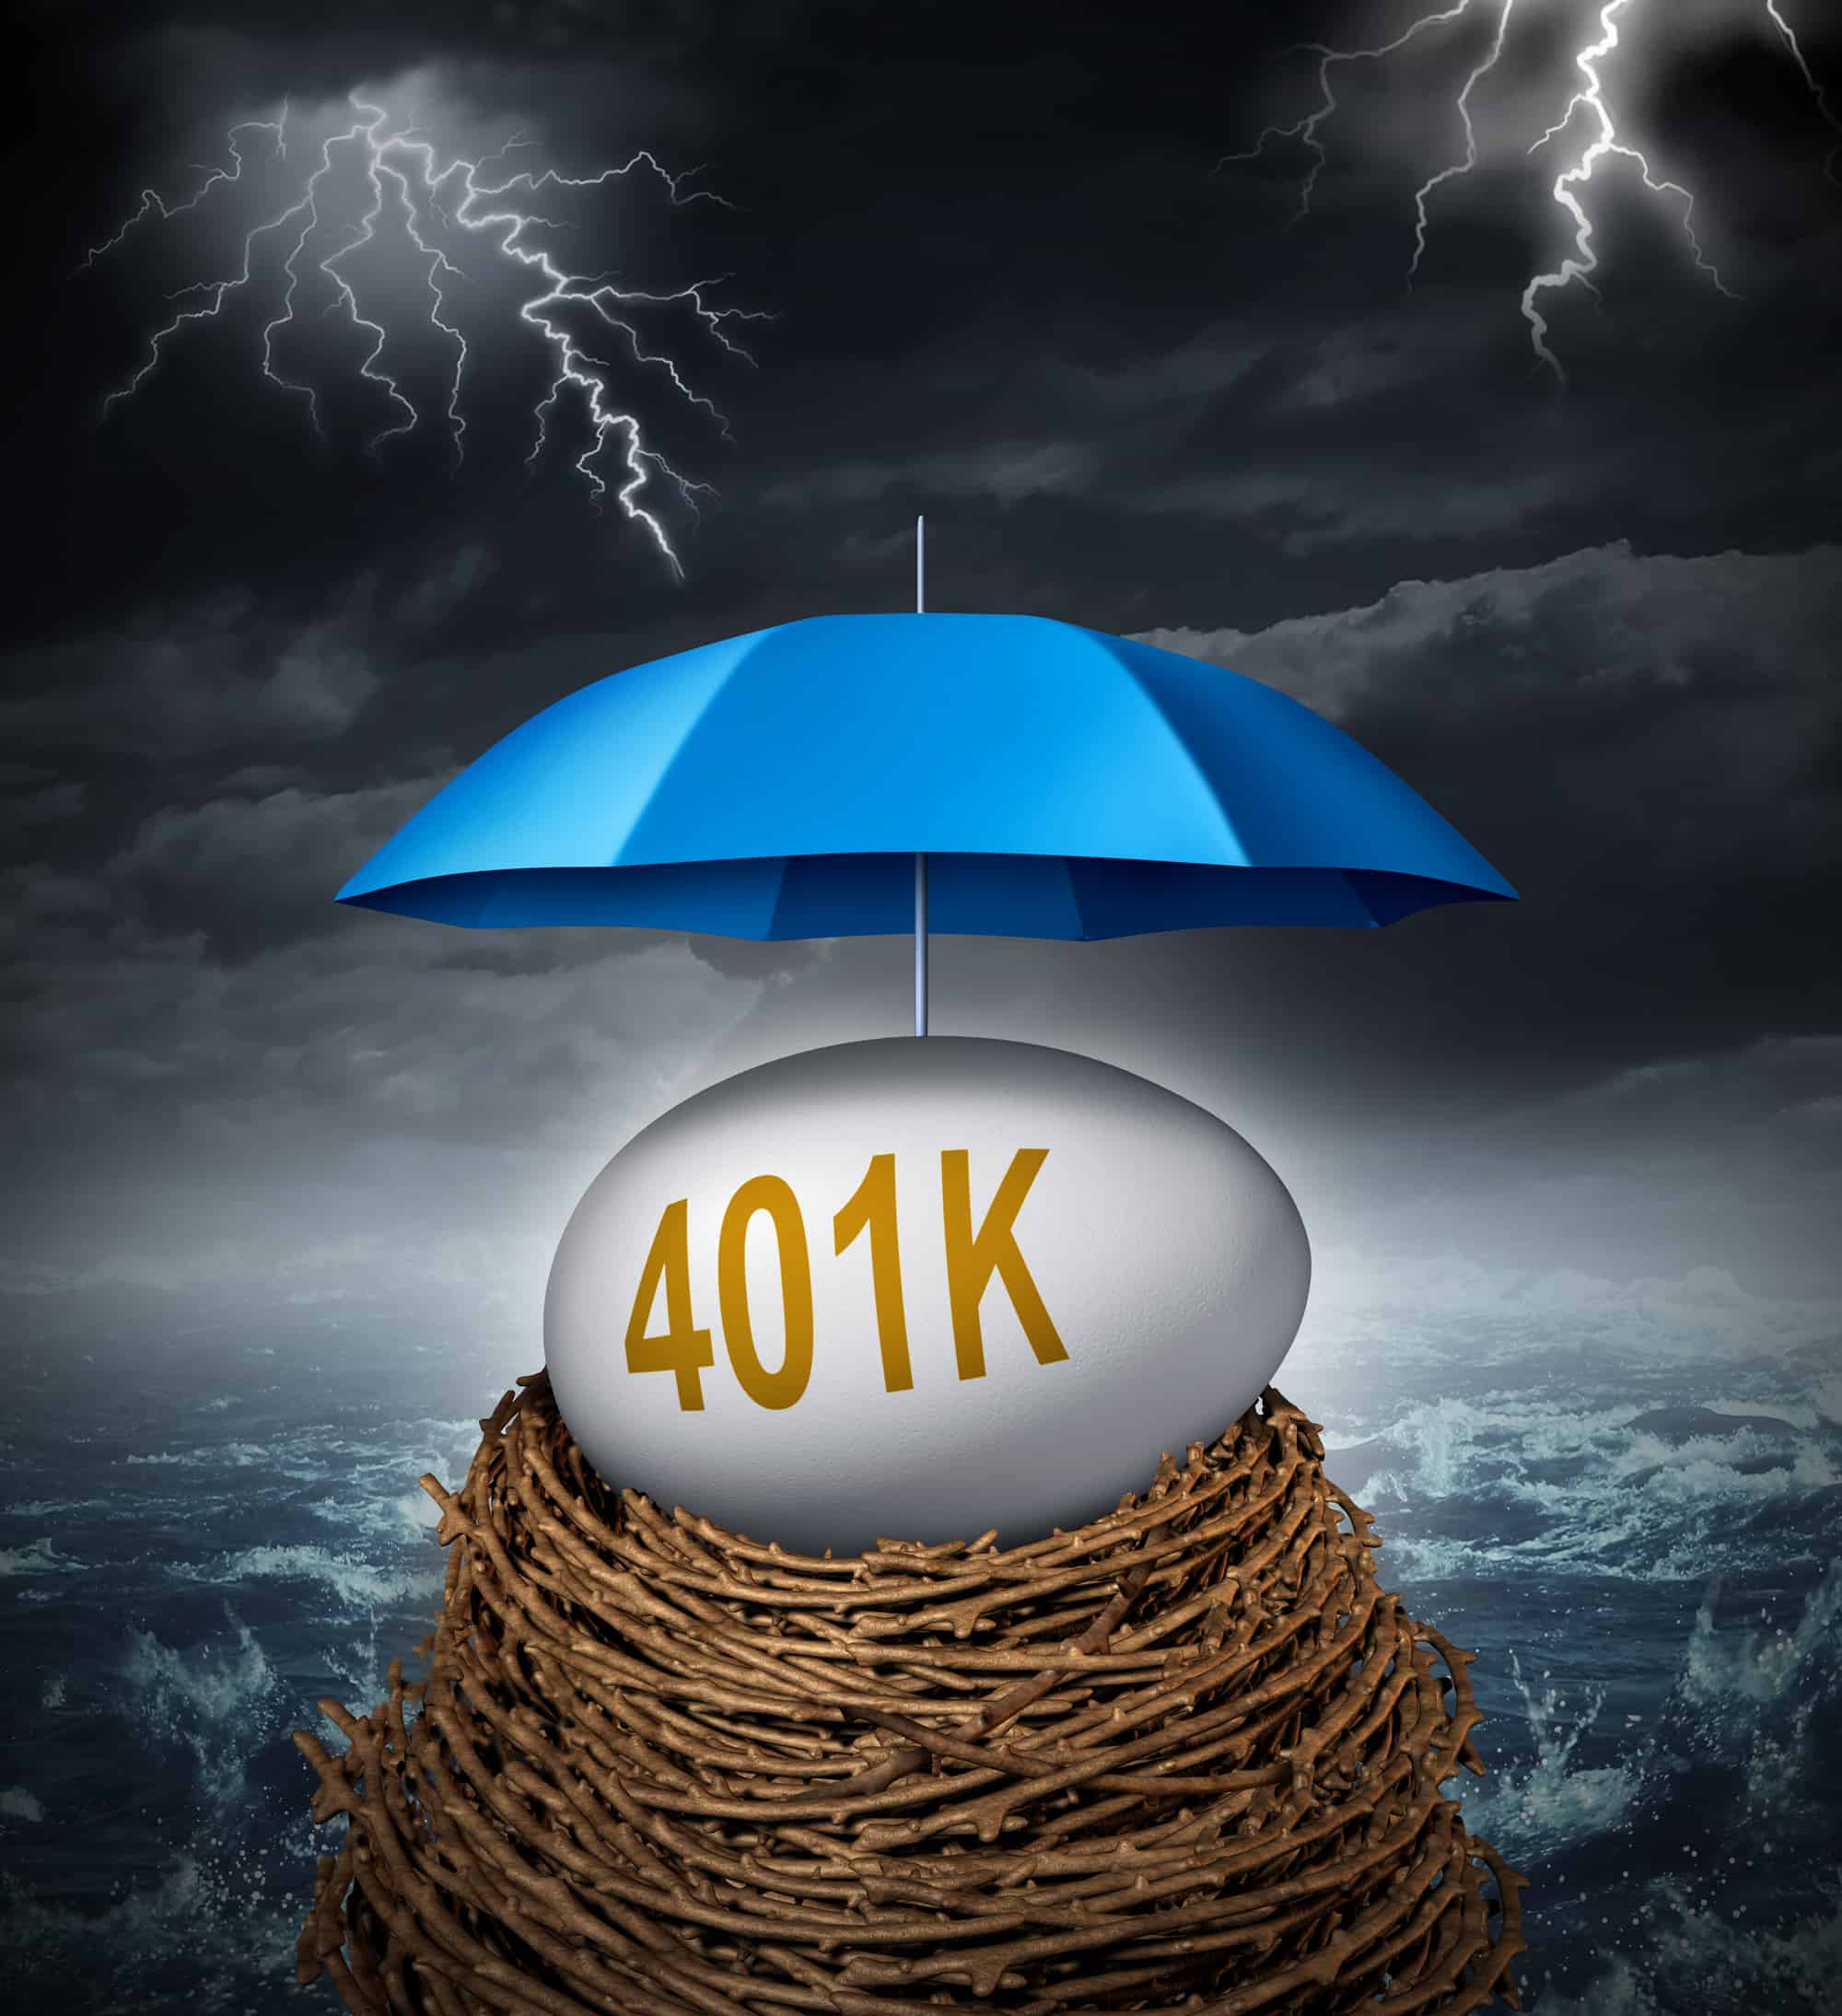 an egg with '401k' spelled on it in a nest during a storm in an ocean storm